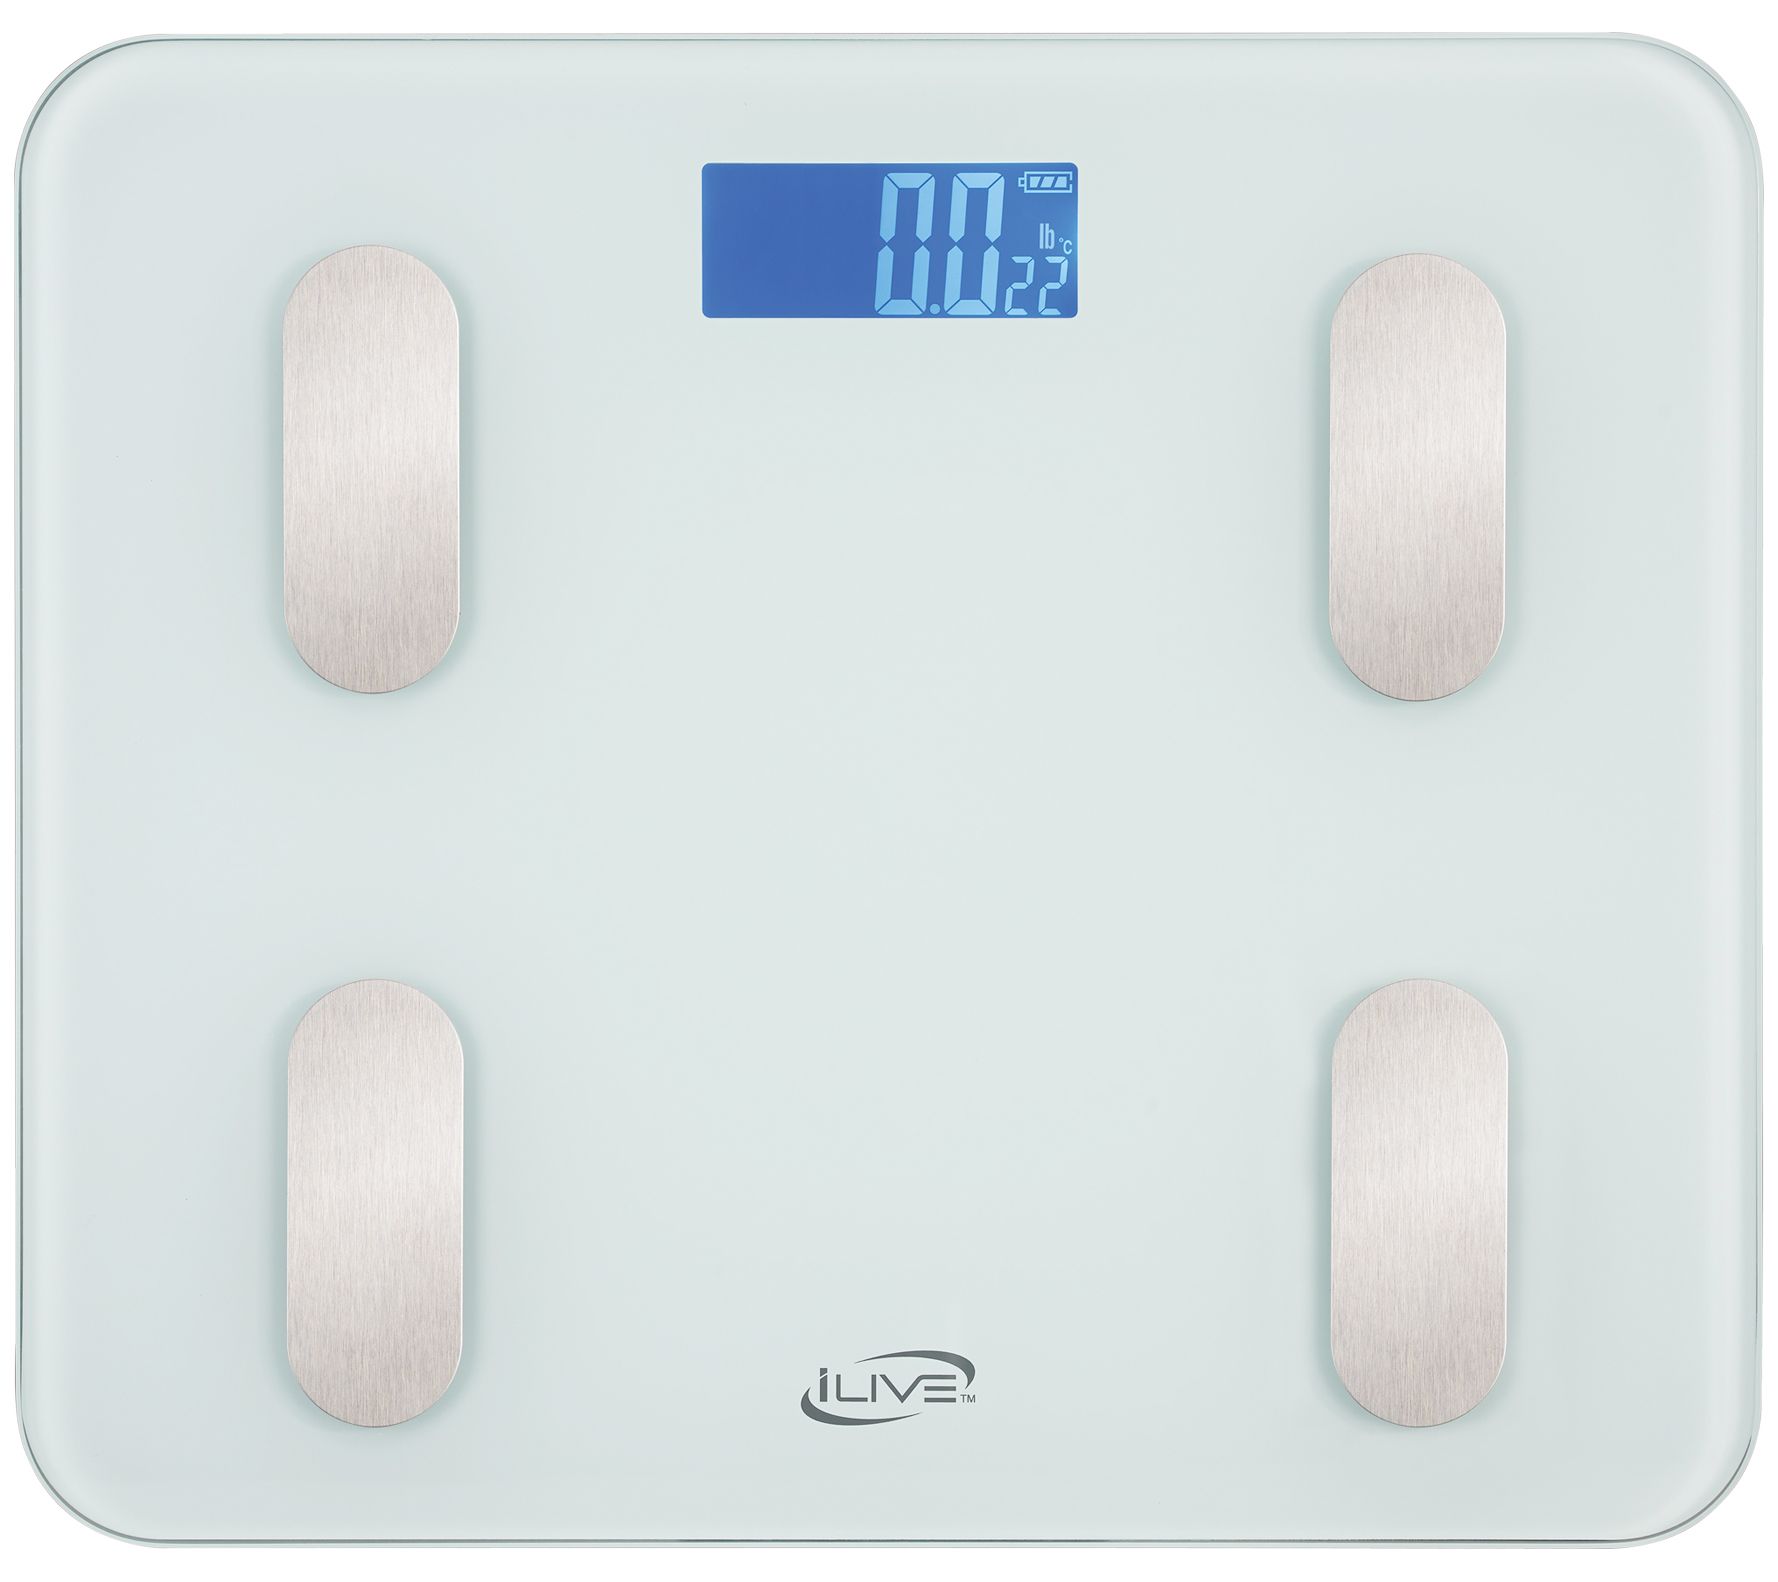 The Taylor 7506 Glass Lithium Electronic Bathroom Scale